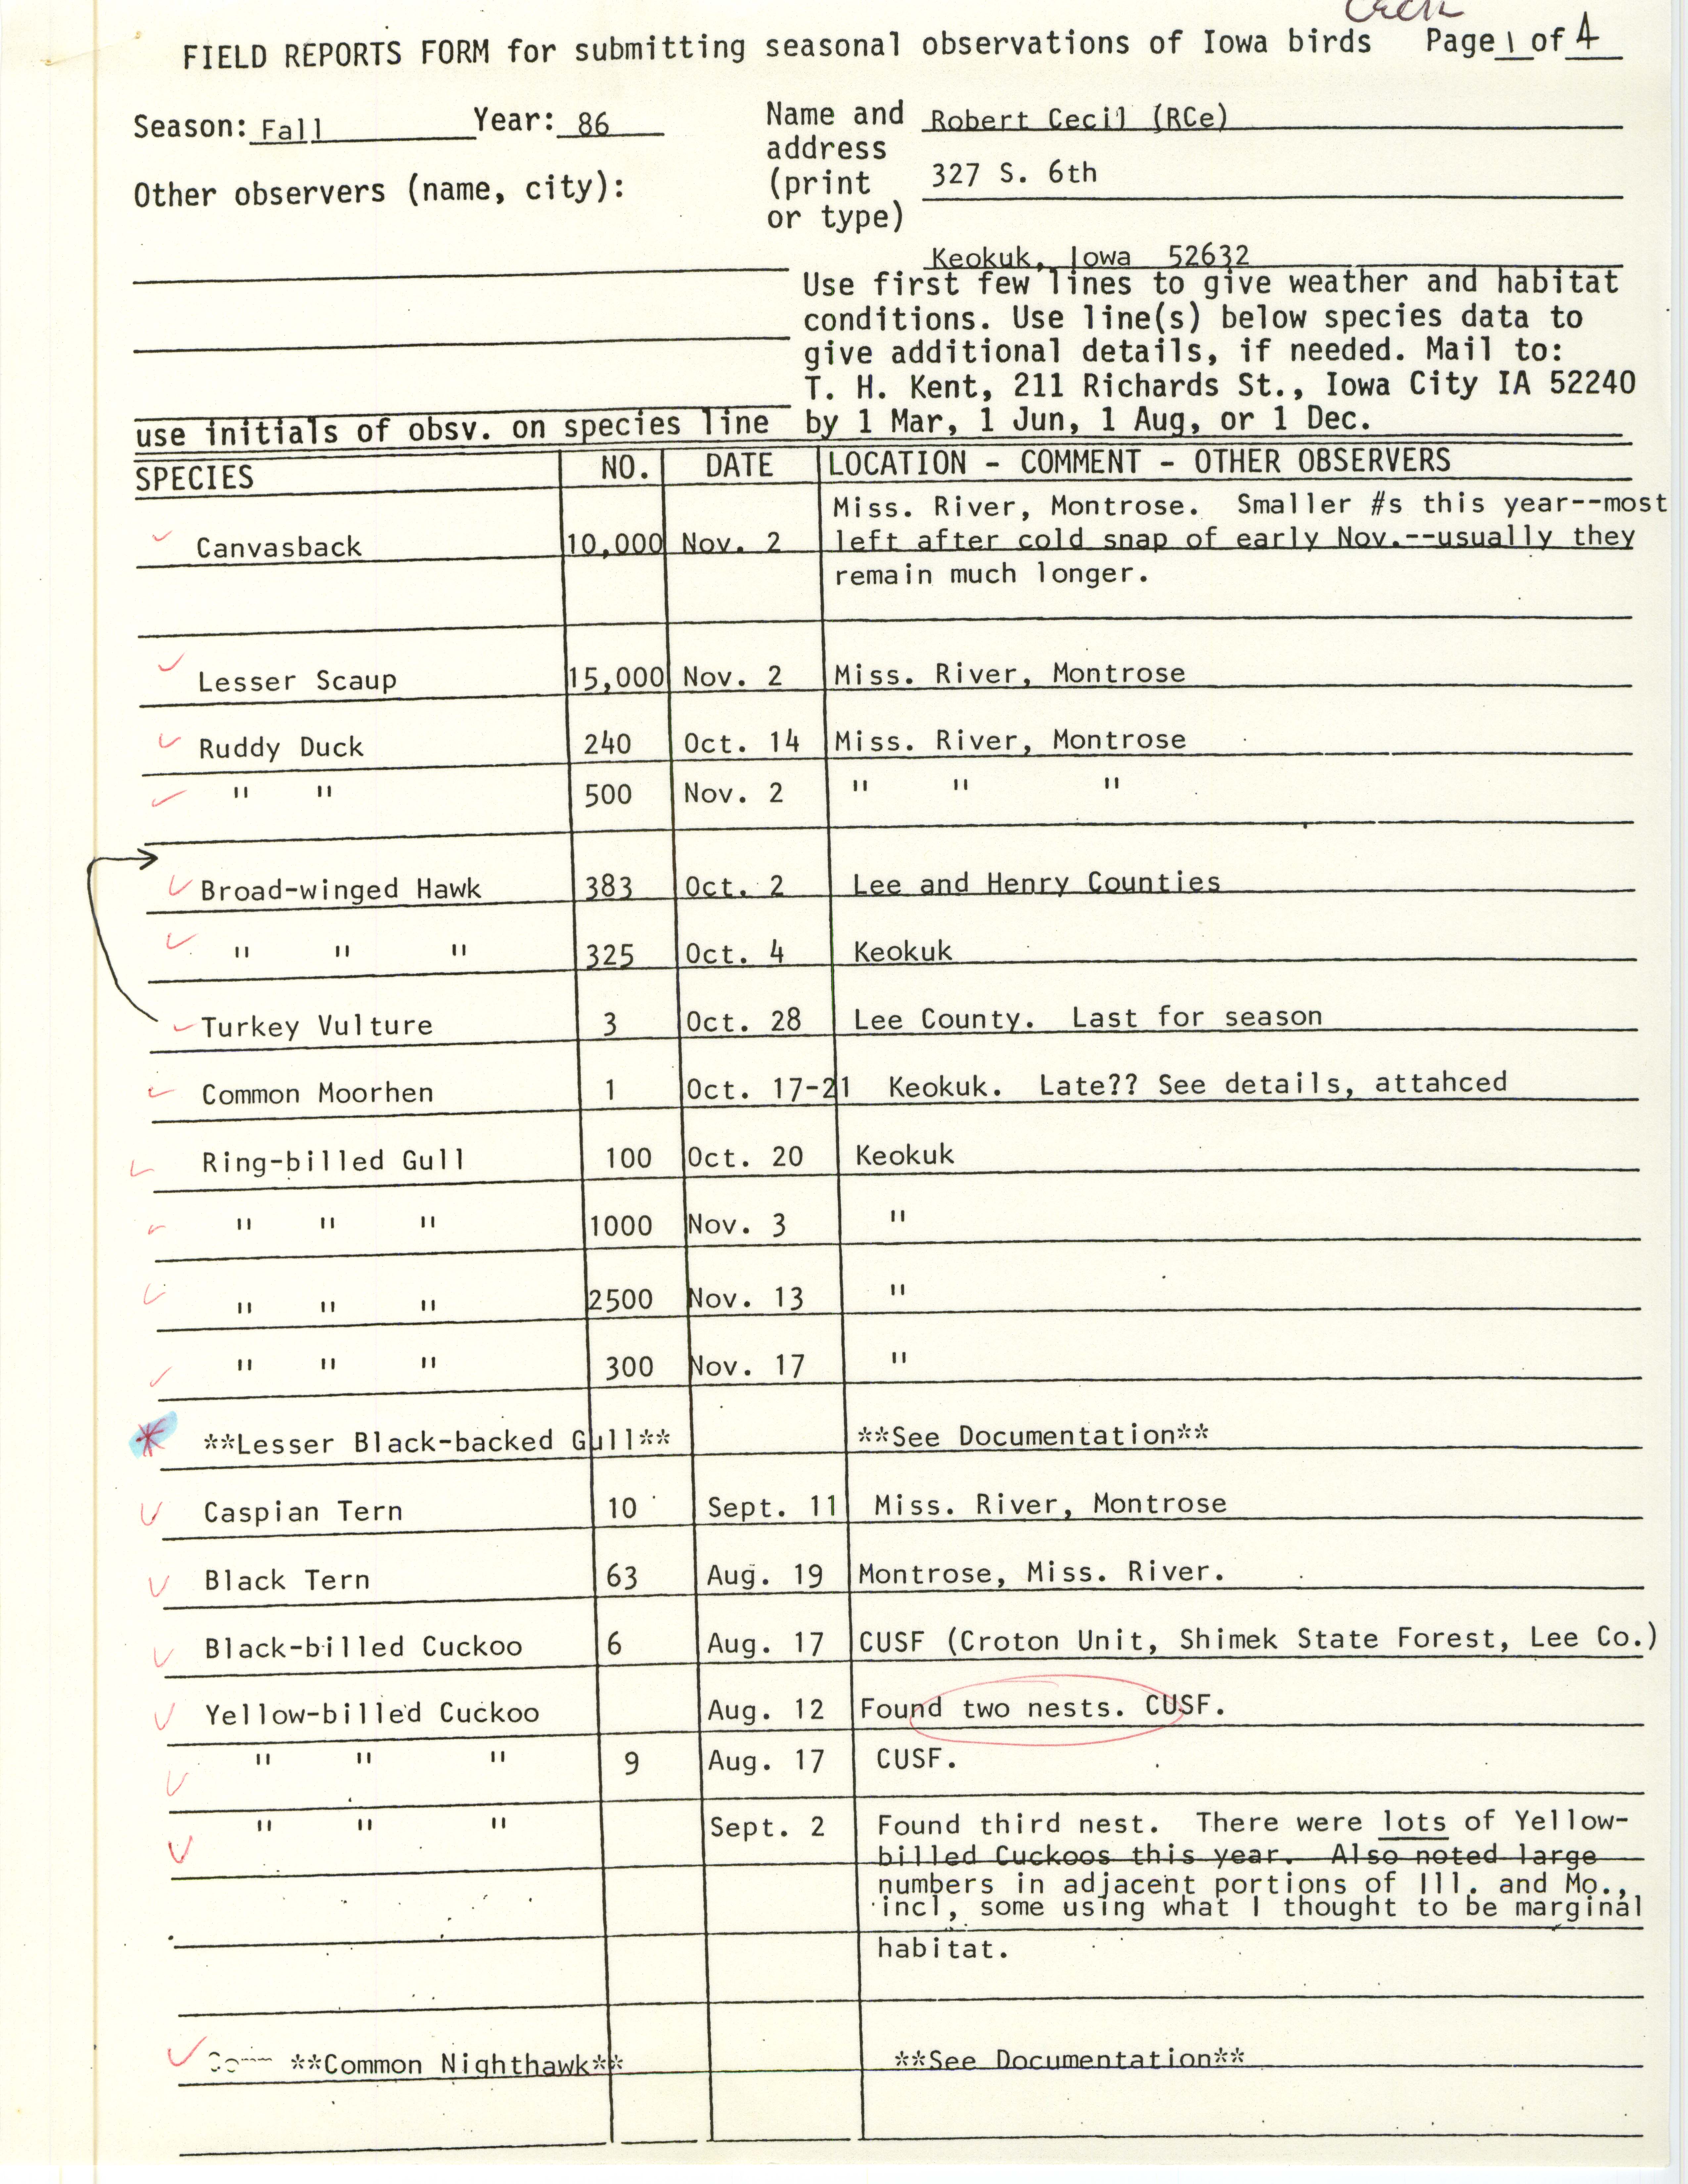 Field reports form, contributed by Robert Cecil, fall 1986